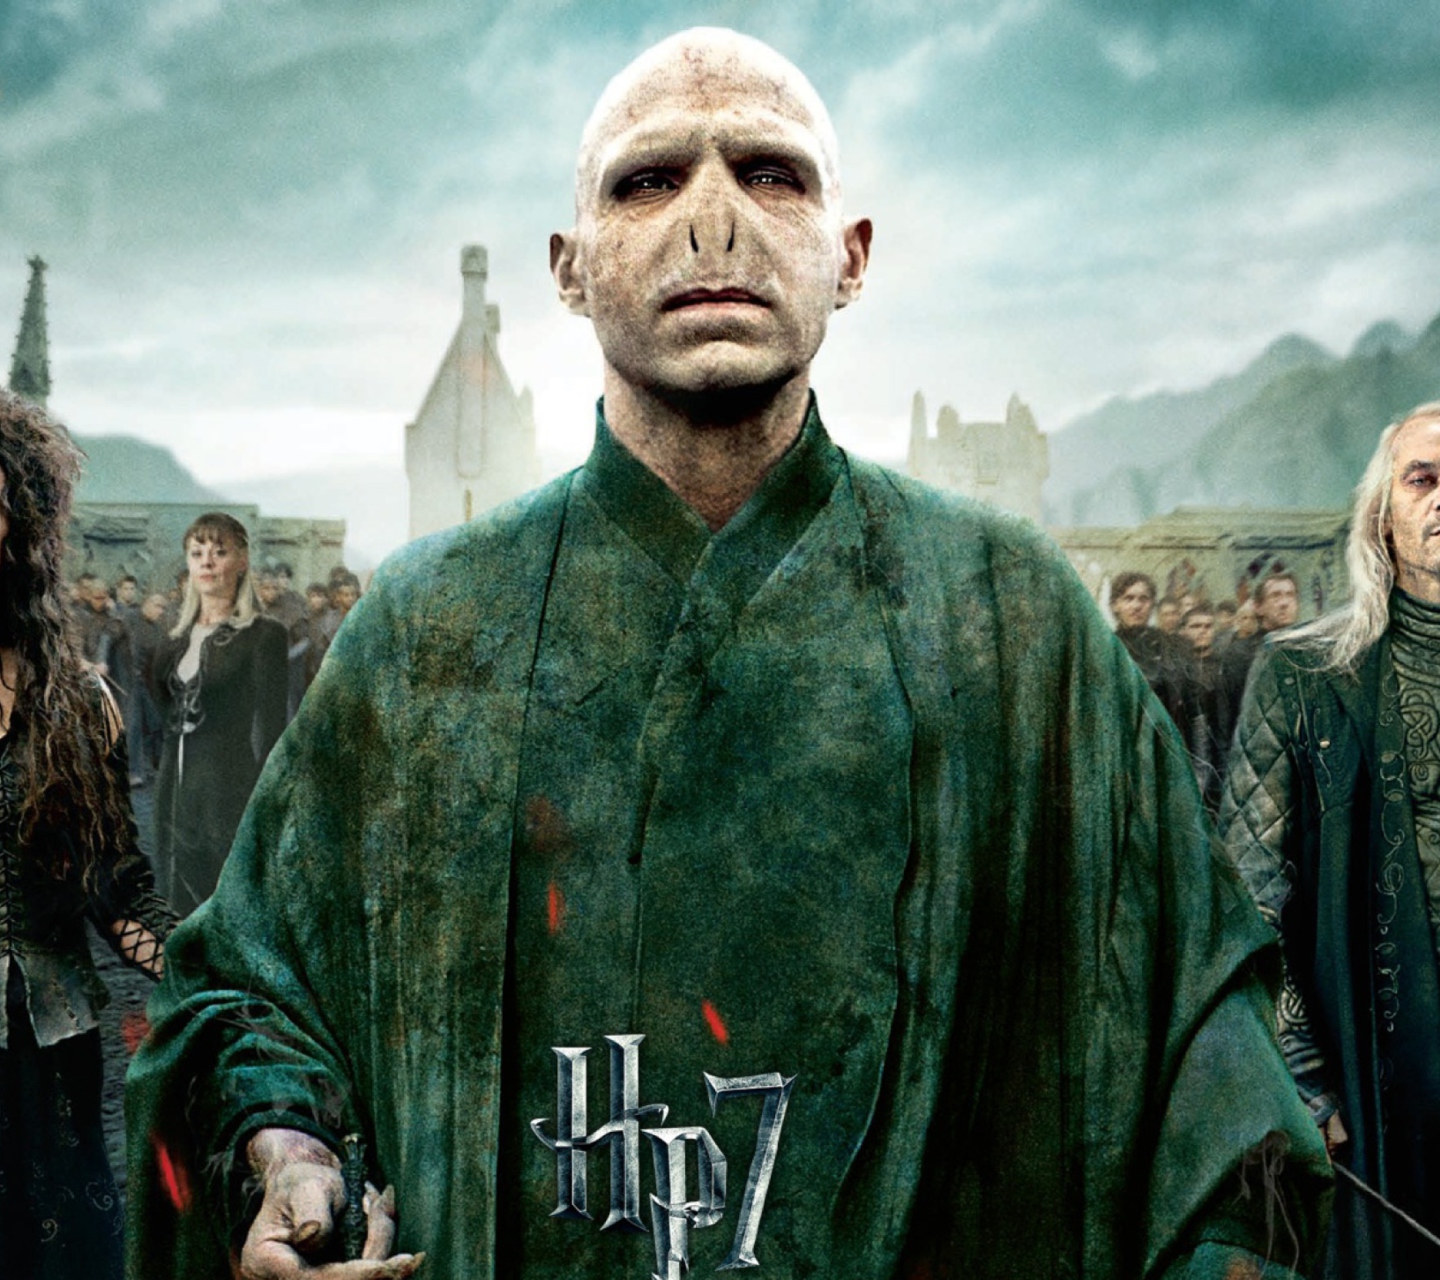 Das Harry Potter And The Deathly Hallows Part 2 Wallpaper 1440x1280